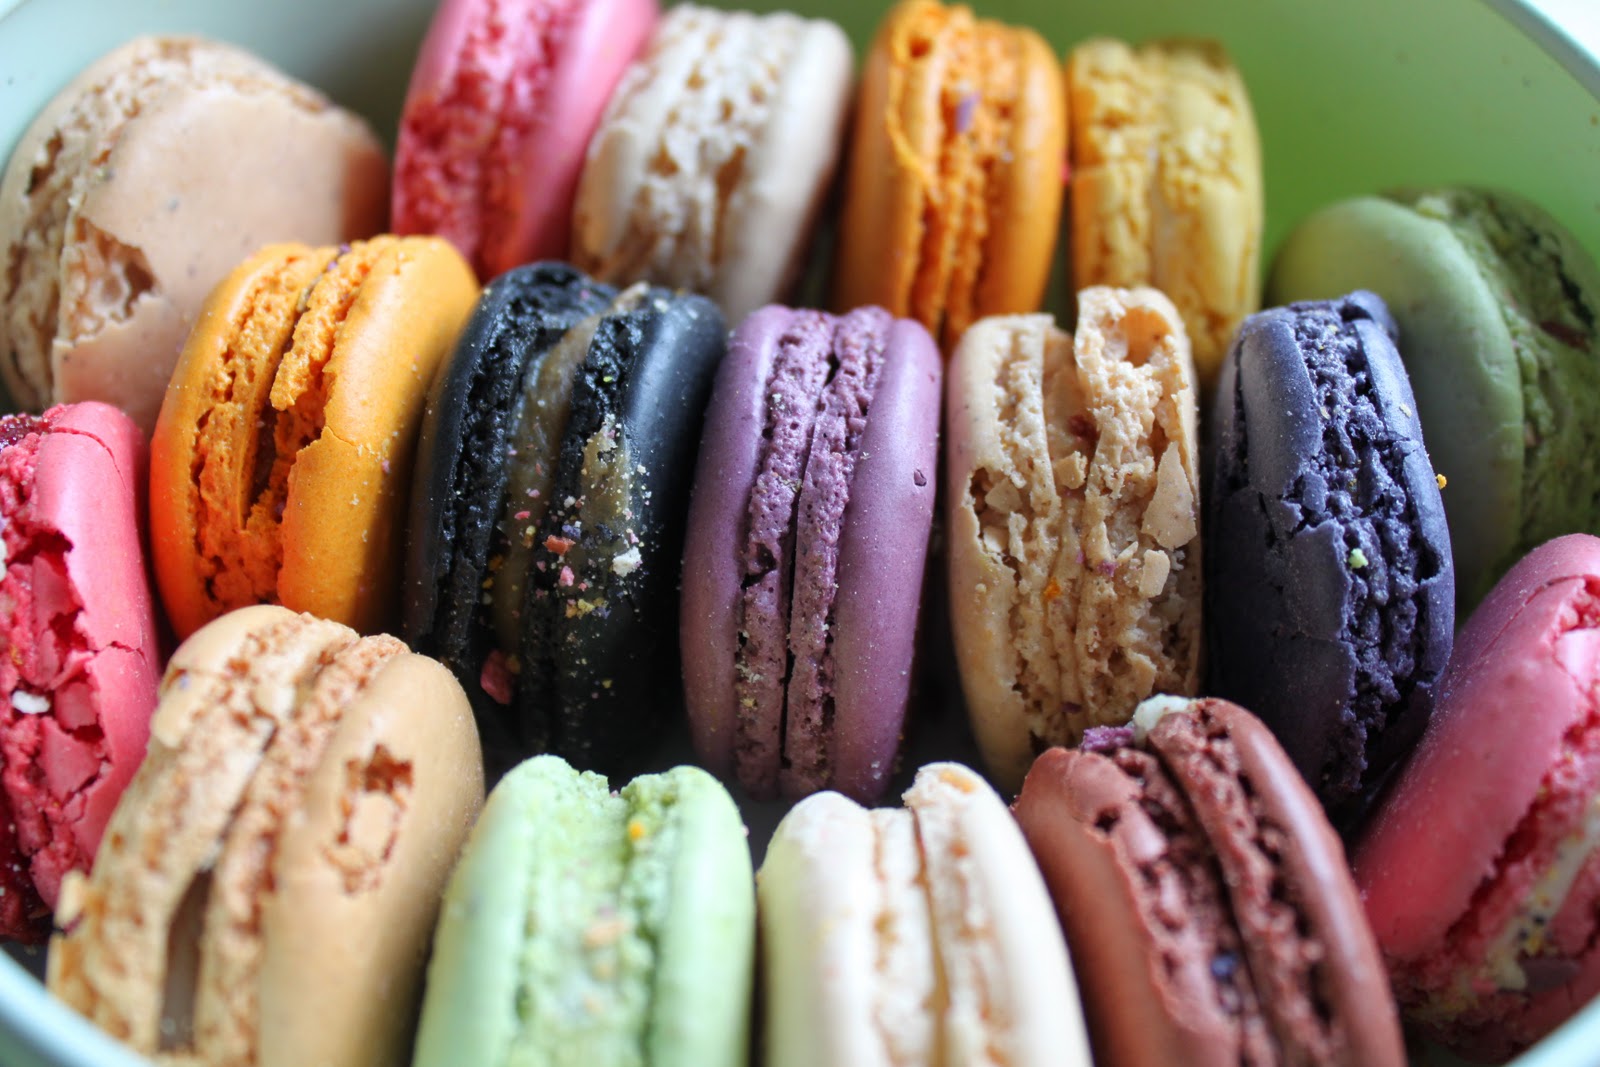 Pudding Pie Lane: Macarons, dance shows and other sparkly things